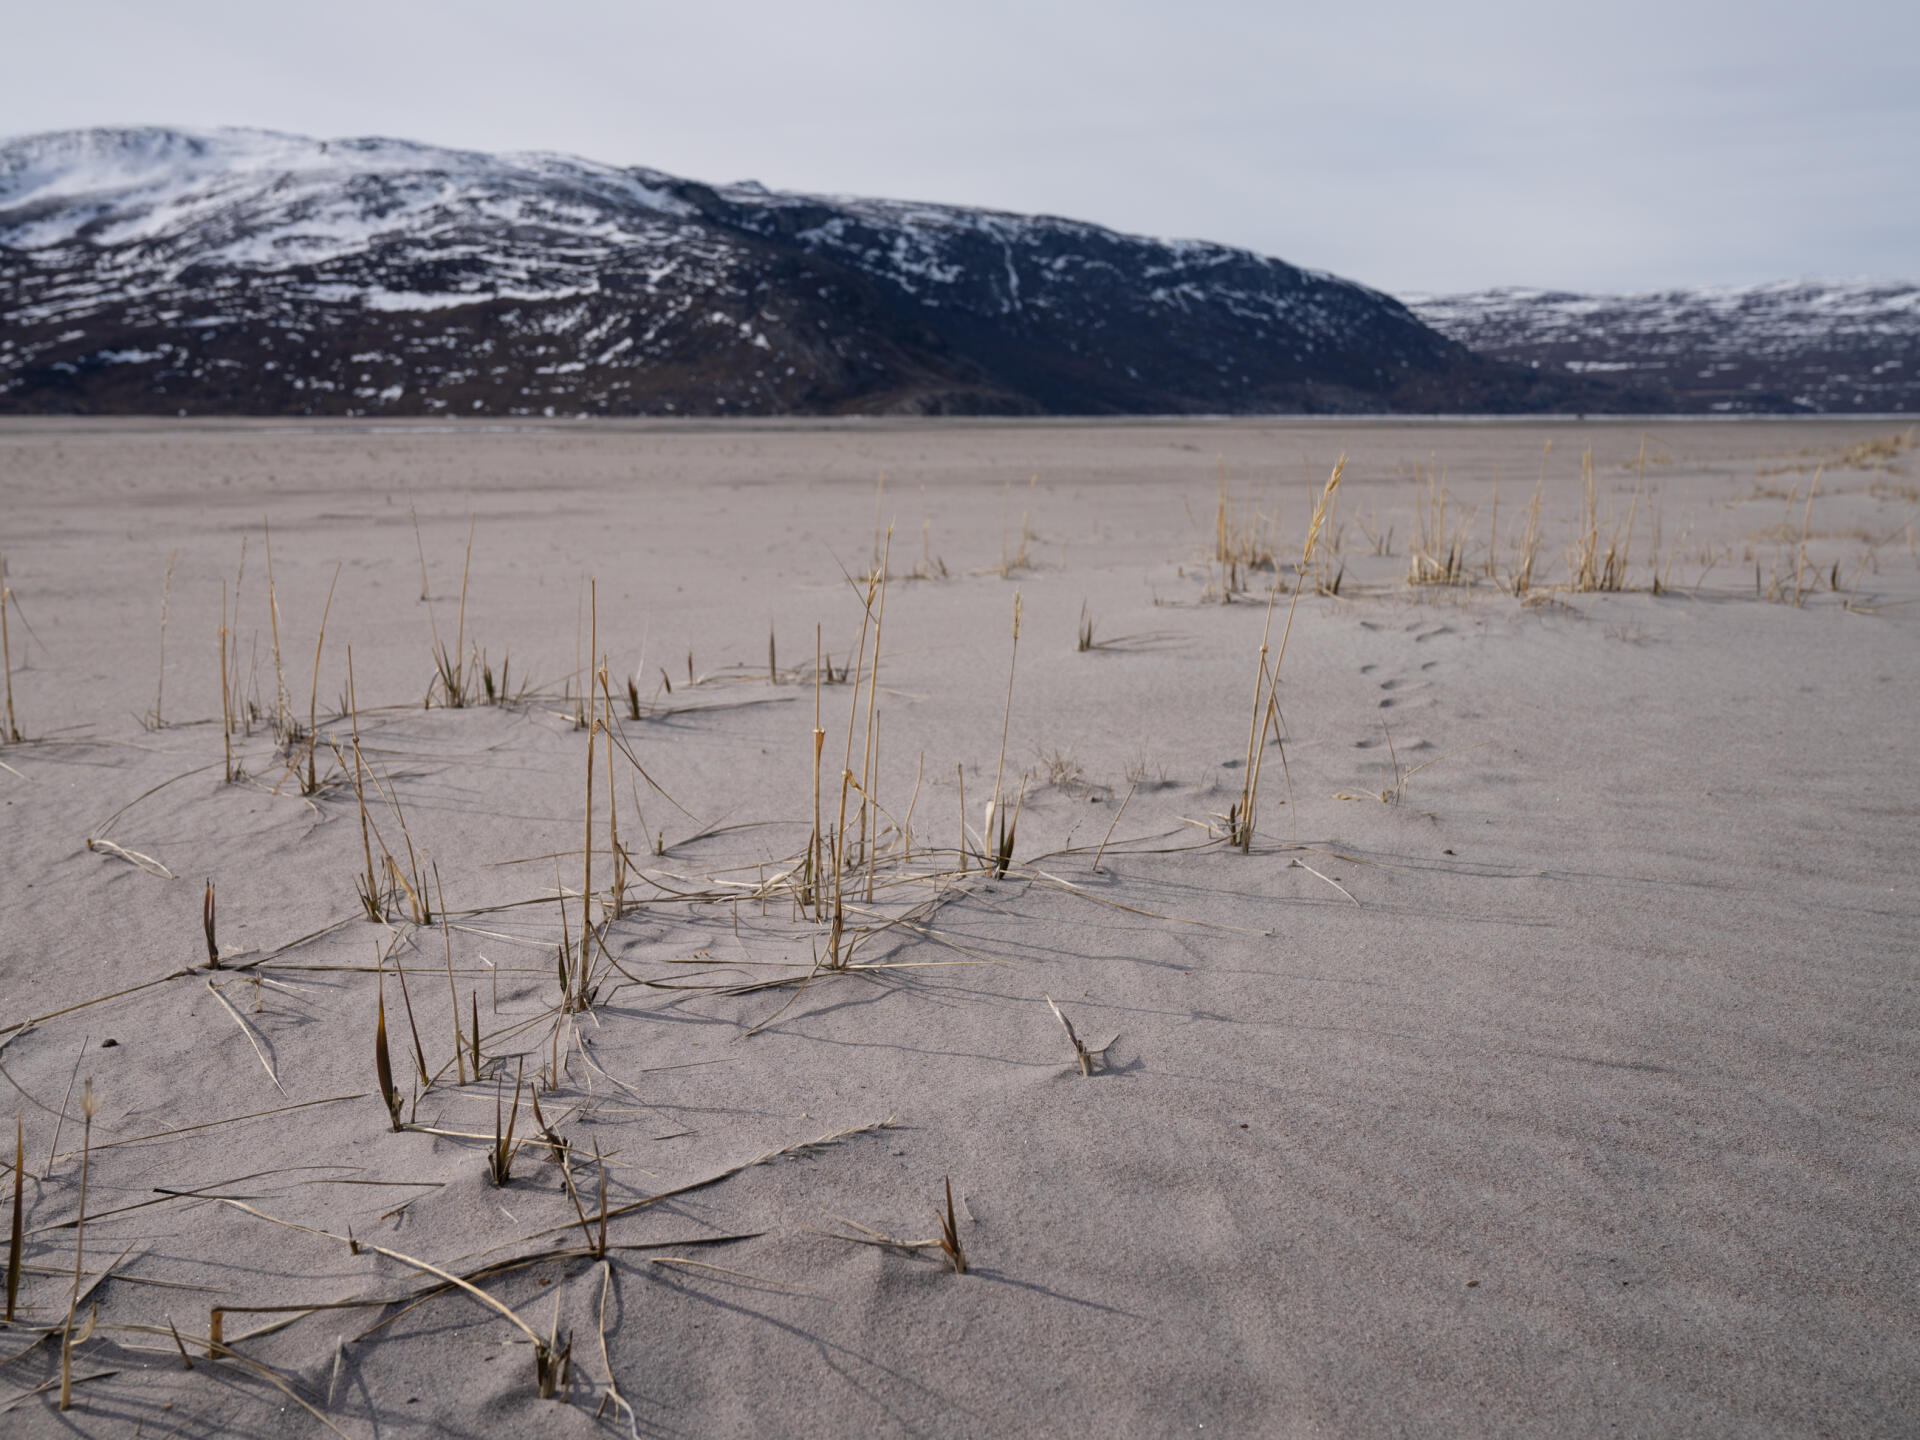 Sondre Strom fjord gives access to a huge sand spit located near Kangerlussuaq under Russell Glacier, here May 23, 2022.